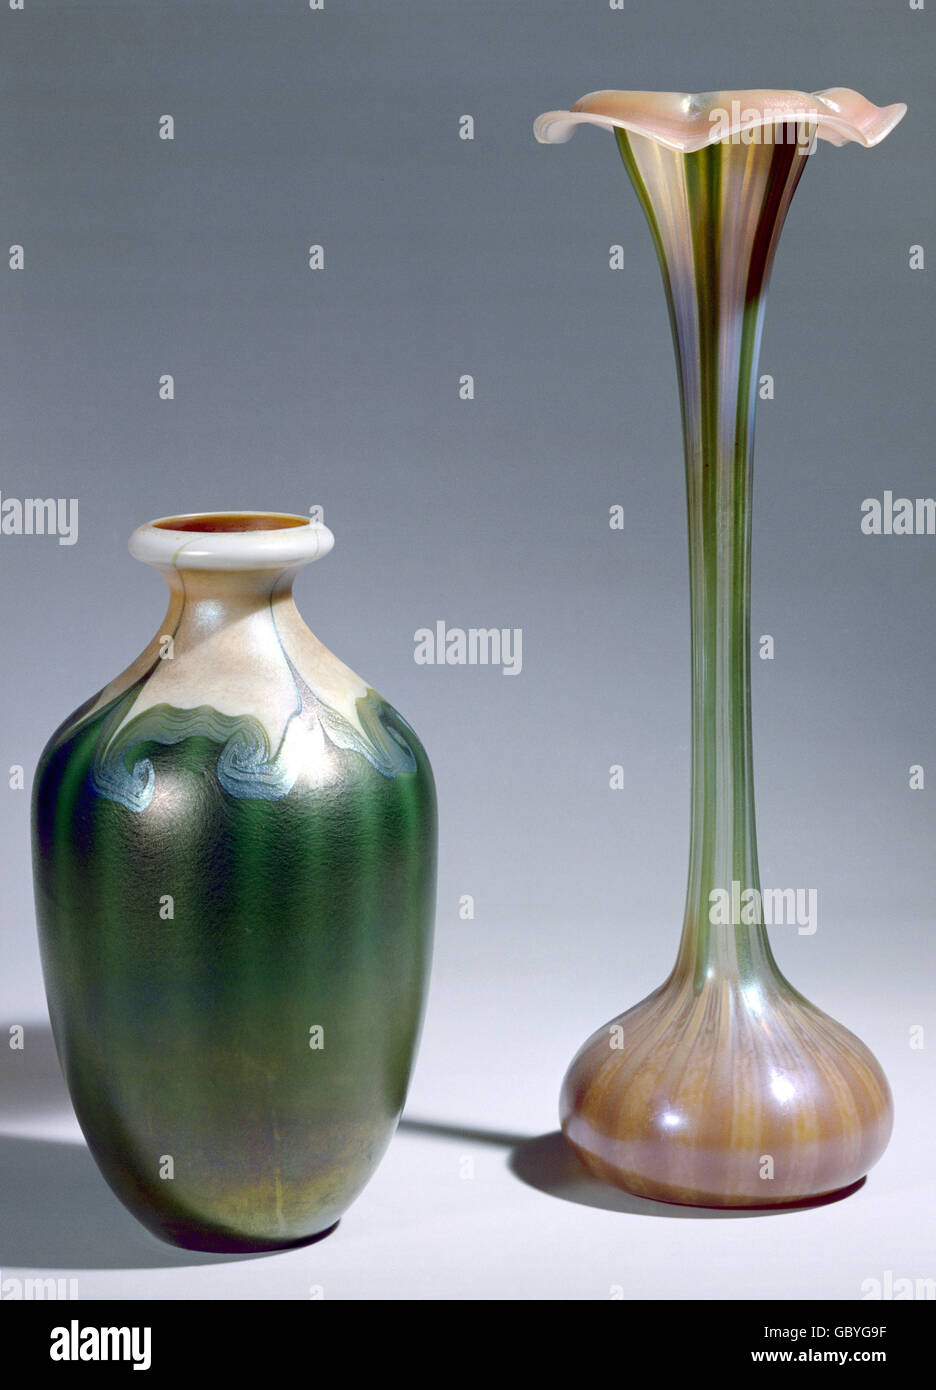 fine arts, Art Nouveau, vase, two vases made of Favrile glass, by Tiffany, New York, 1900, Museum of Fine Arts and Commerce, Hamburg, Stock Photo